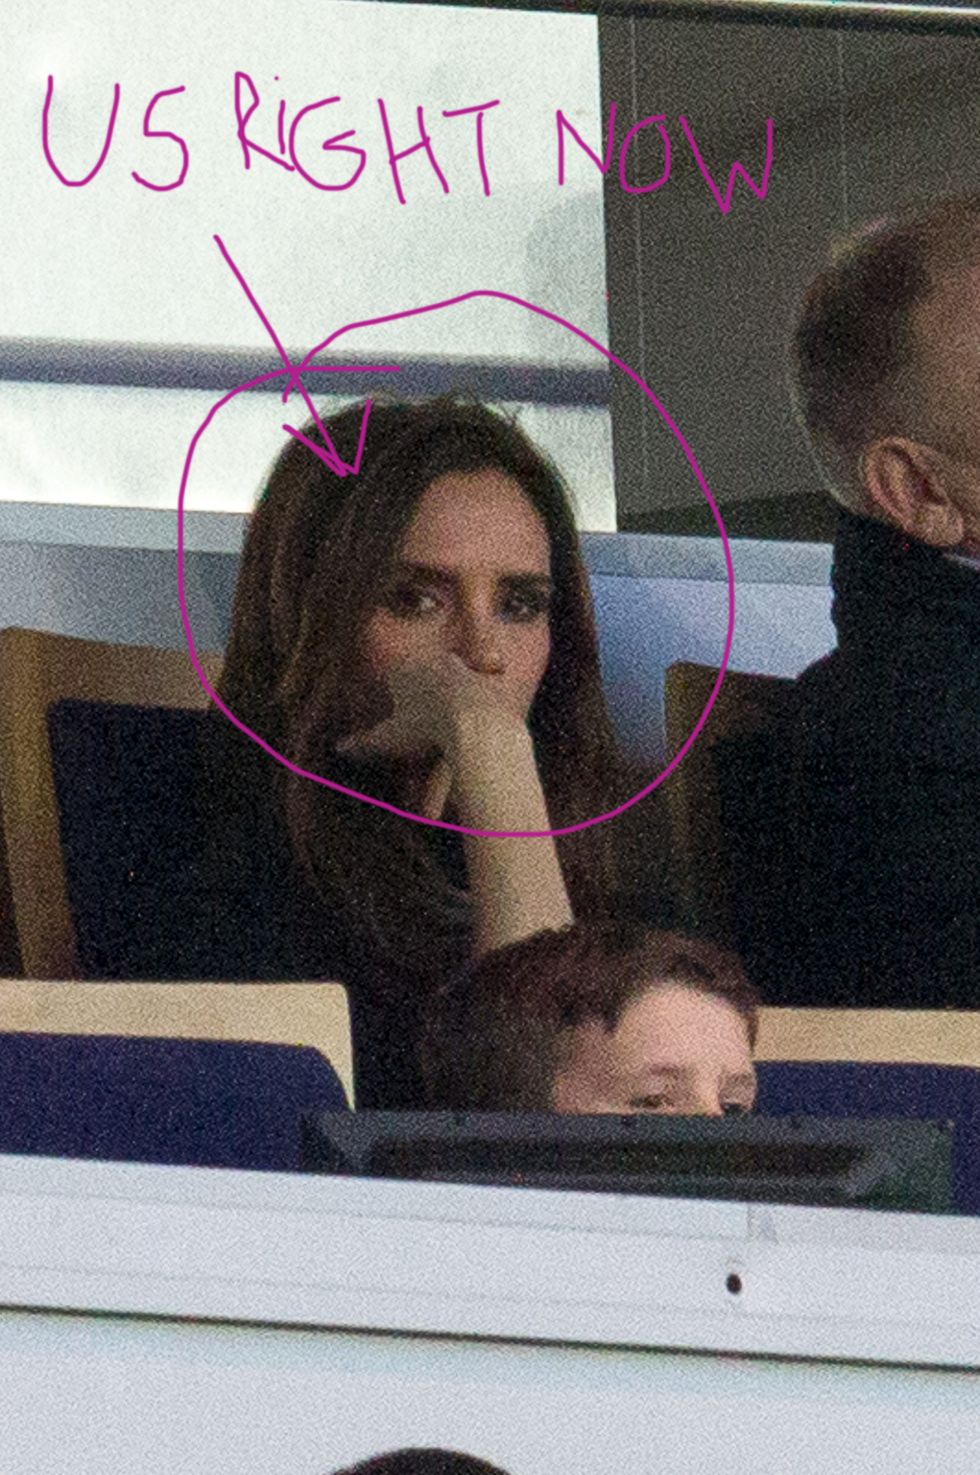 Victoria Beckham is bored watching football